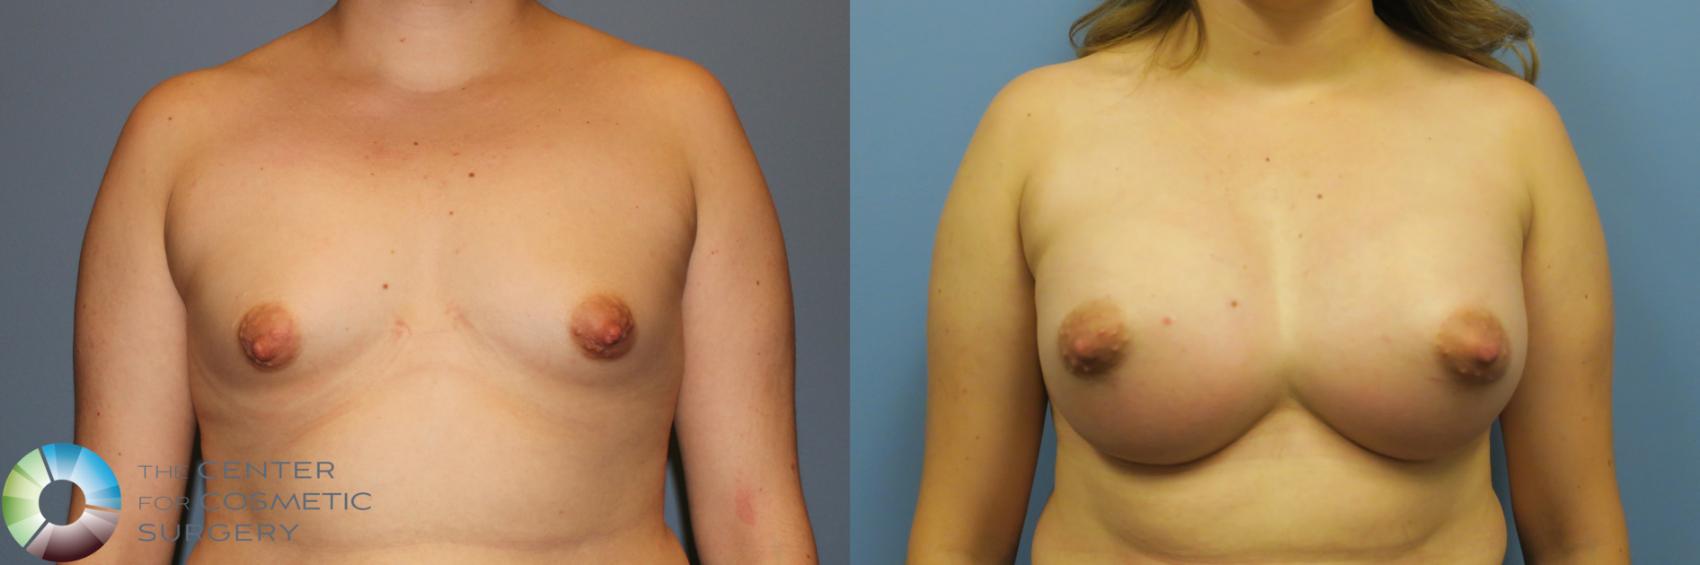 Before & After Breast Augmentation Case 11728 Front View in Golden, CO